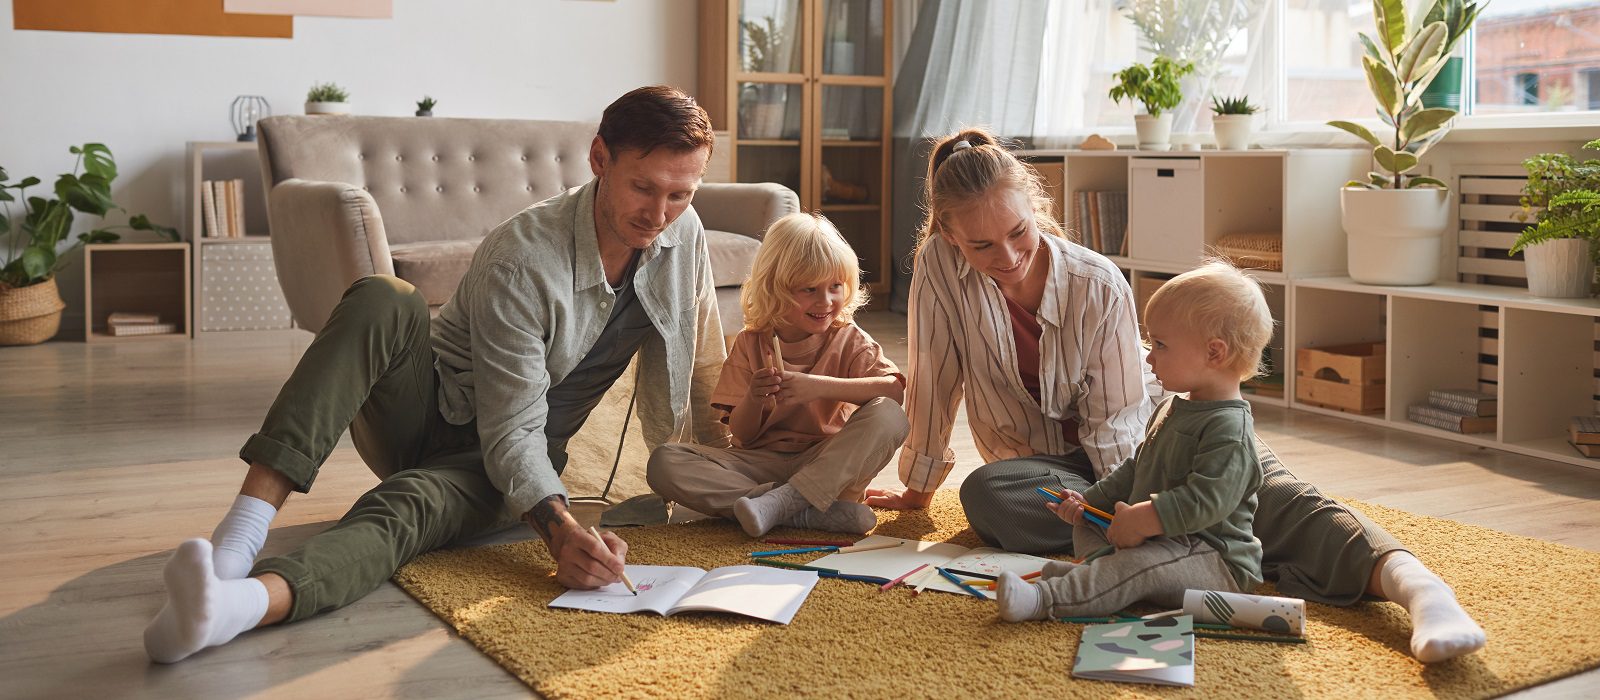 Two parents drawing on the floor together with their two children in the living room